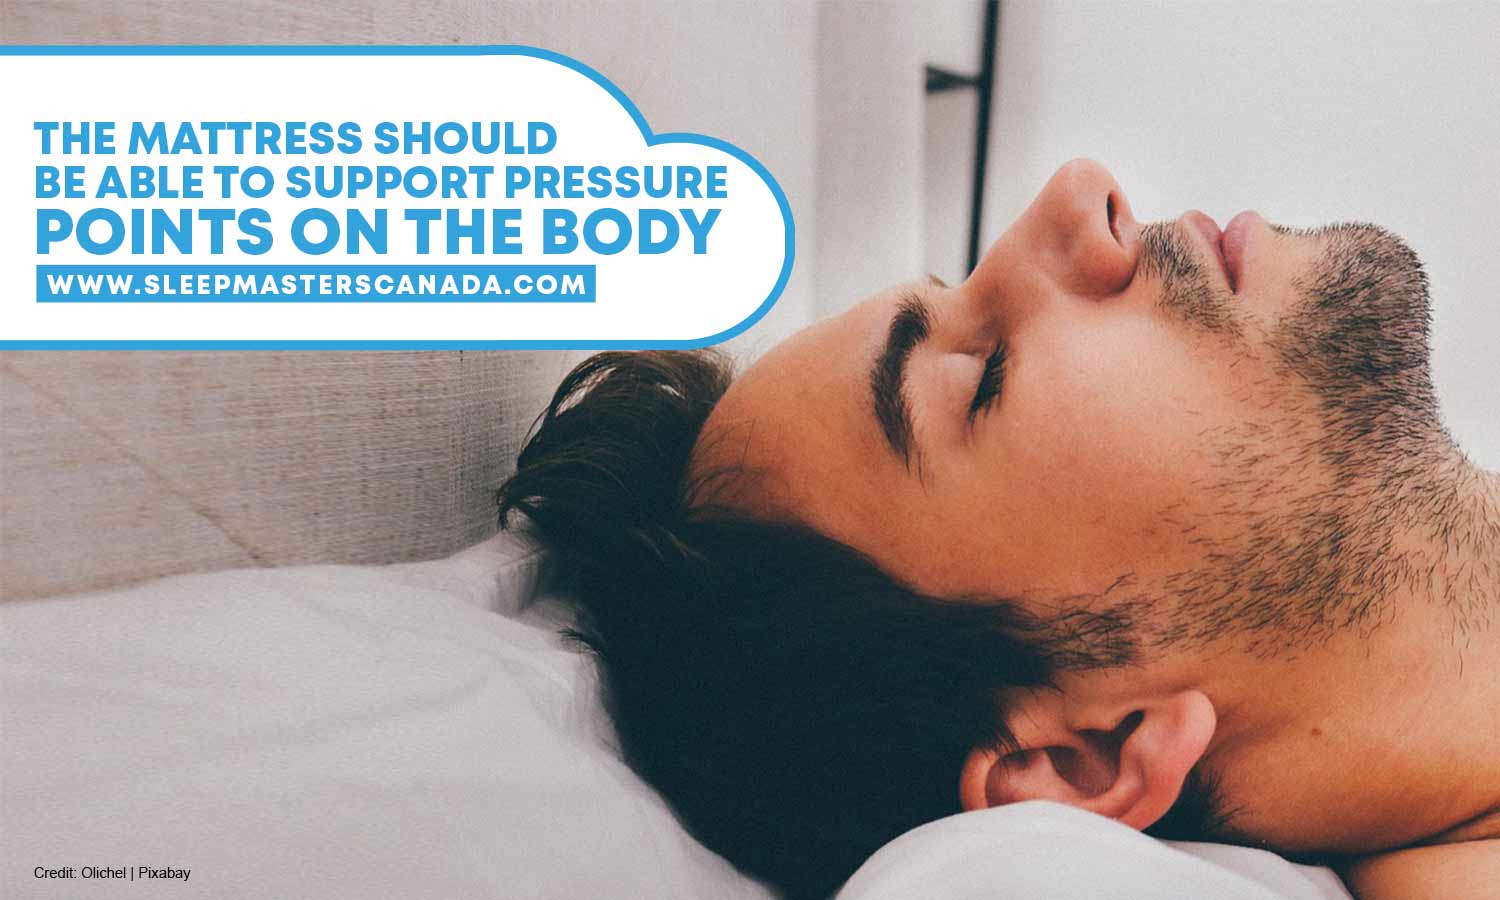 The mattress should be able to support pressure points on the body